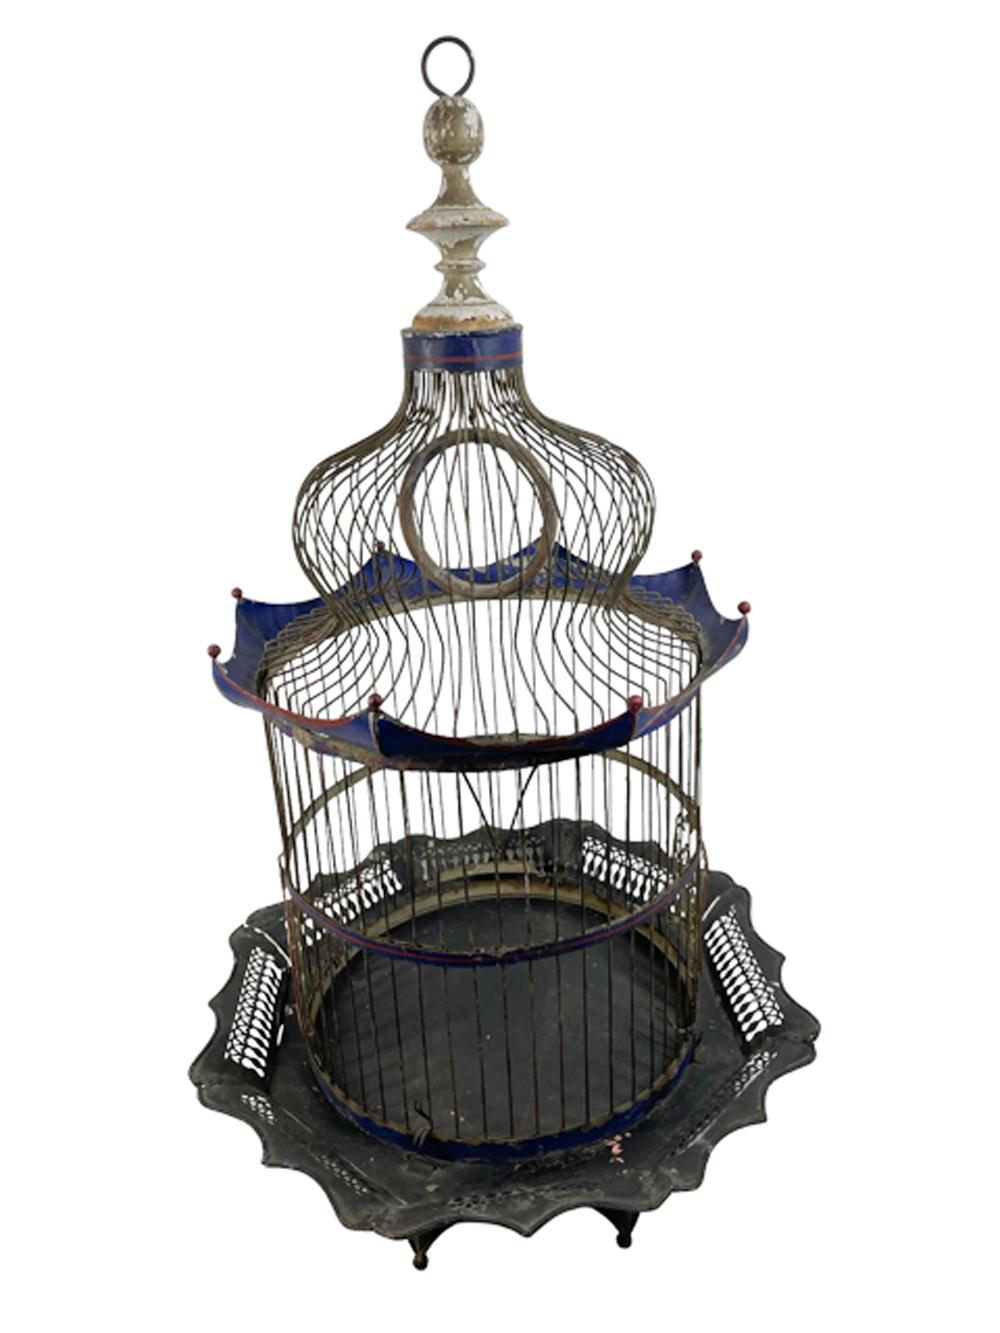 Nineteenth century American Birdcage in the Orientalist style. The wire bars with tin hoops at base, center, and top forming cylindrical cage, two cast zinc doors inscribed 'J. MAXHEIMER'S / PATENT JUNE 3 1882 NY' at bottom, a scalloped cornice